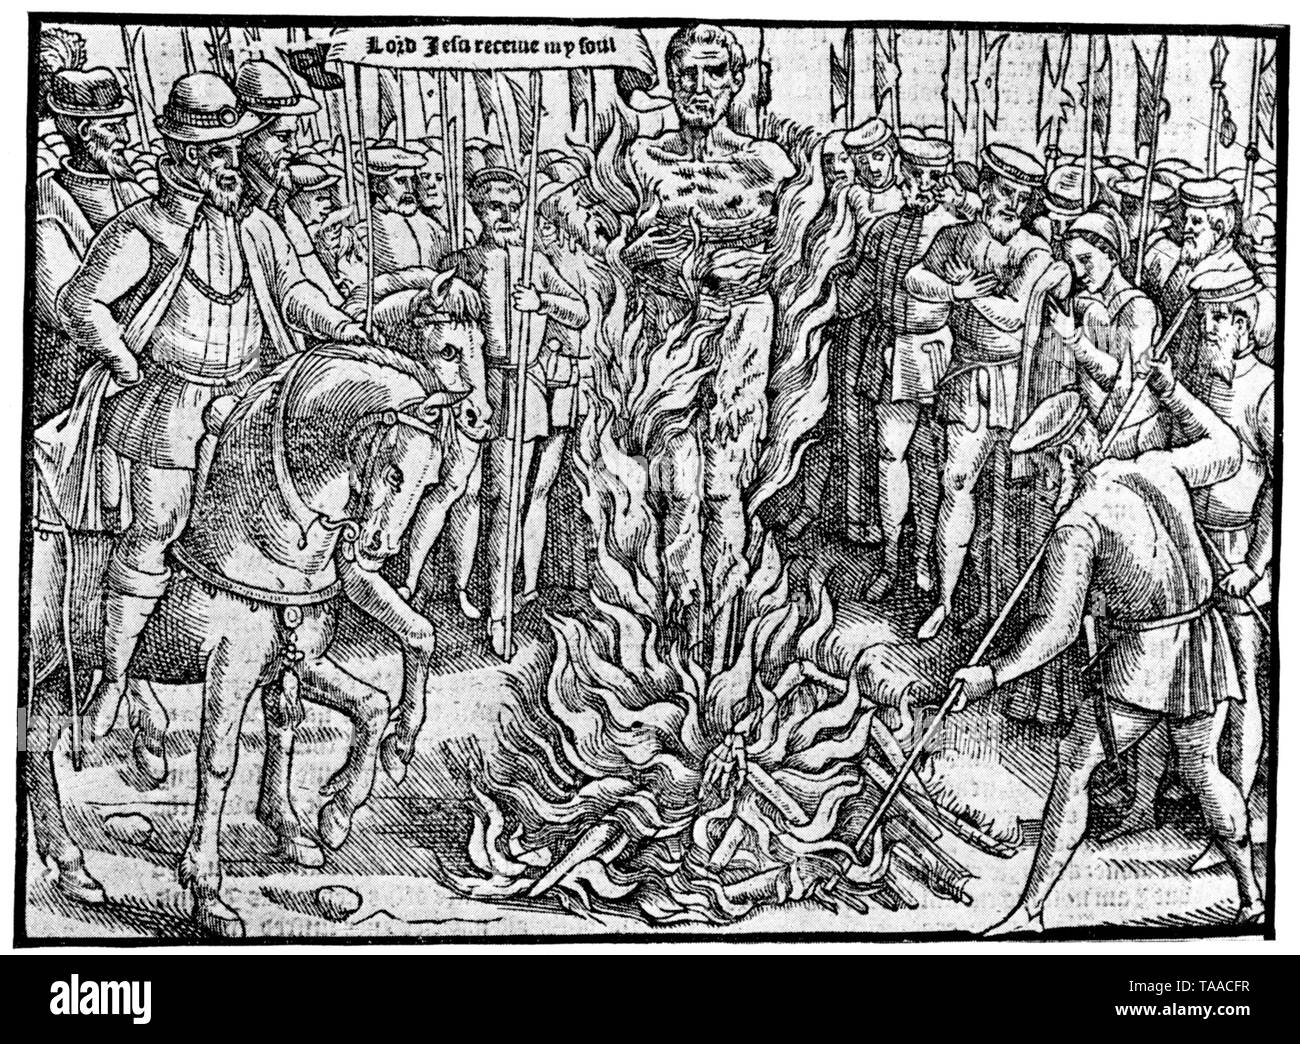 The Burning of Bishop Hooper (c1495-1555) at Gloucester, 9th February 1555. From John Foxe's 'Book of Martyrs' or 'Actes and Monuments', 1570. Hooper was an Anglican Bishop of both Gloucester and Worcester. He was an advocate of the English Reformation and was martyred during the Marian Persecutions. Stock Photo